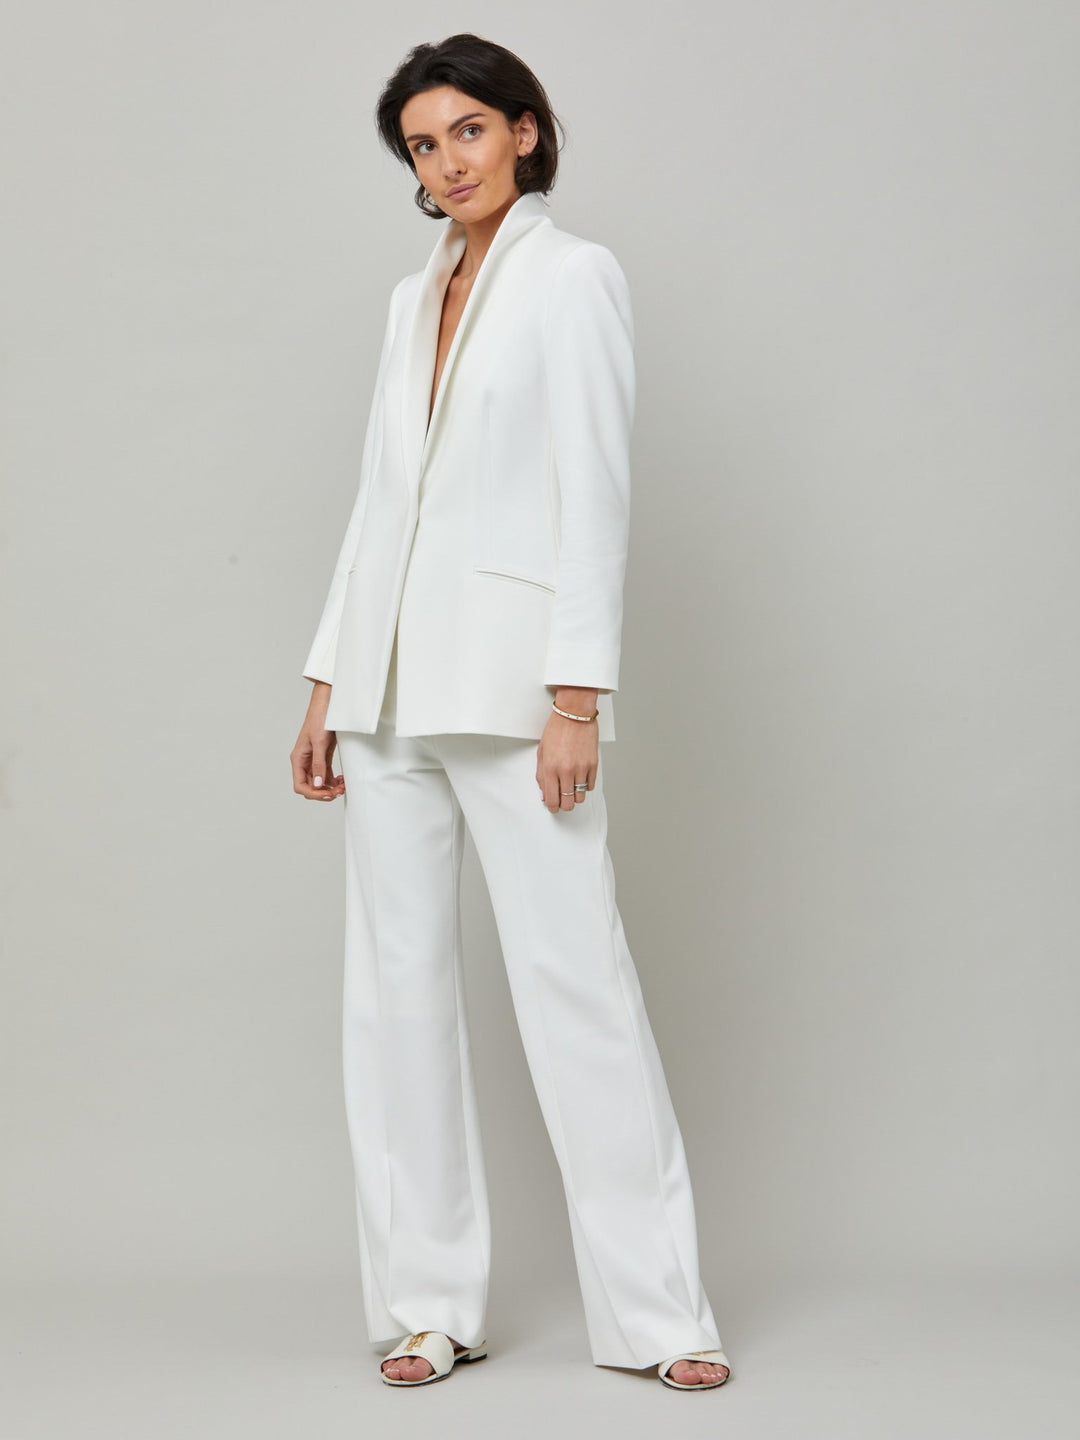 Kelly, an iconic white flare pant. Crafted in sustainable double crepe with a hint of stretch. Revisit the 70's for this season’s game-changing look. Flares are sophisticated, comfortable & leg-lengthening. Guaranteed to flatter the form & never far from fashion’s front line.